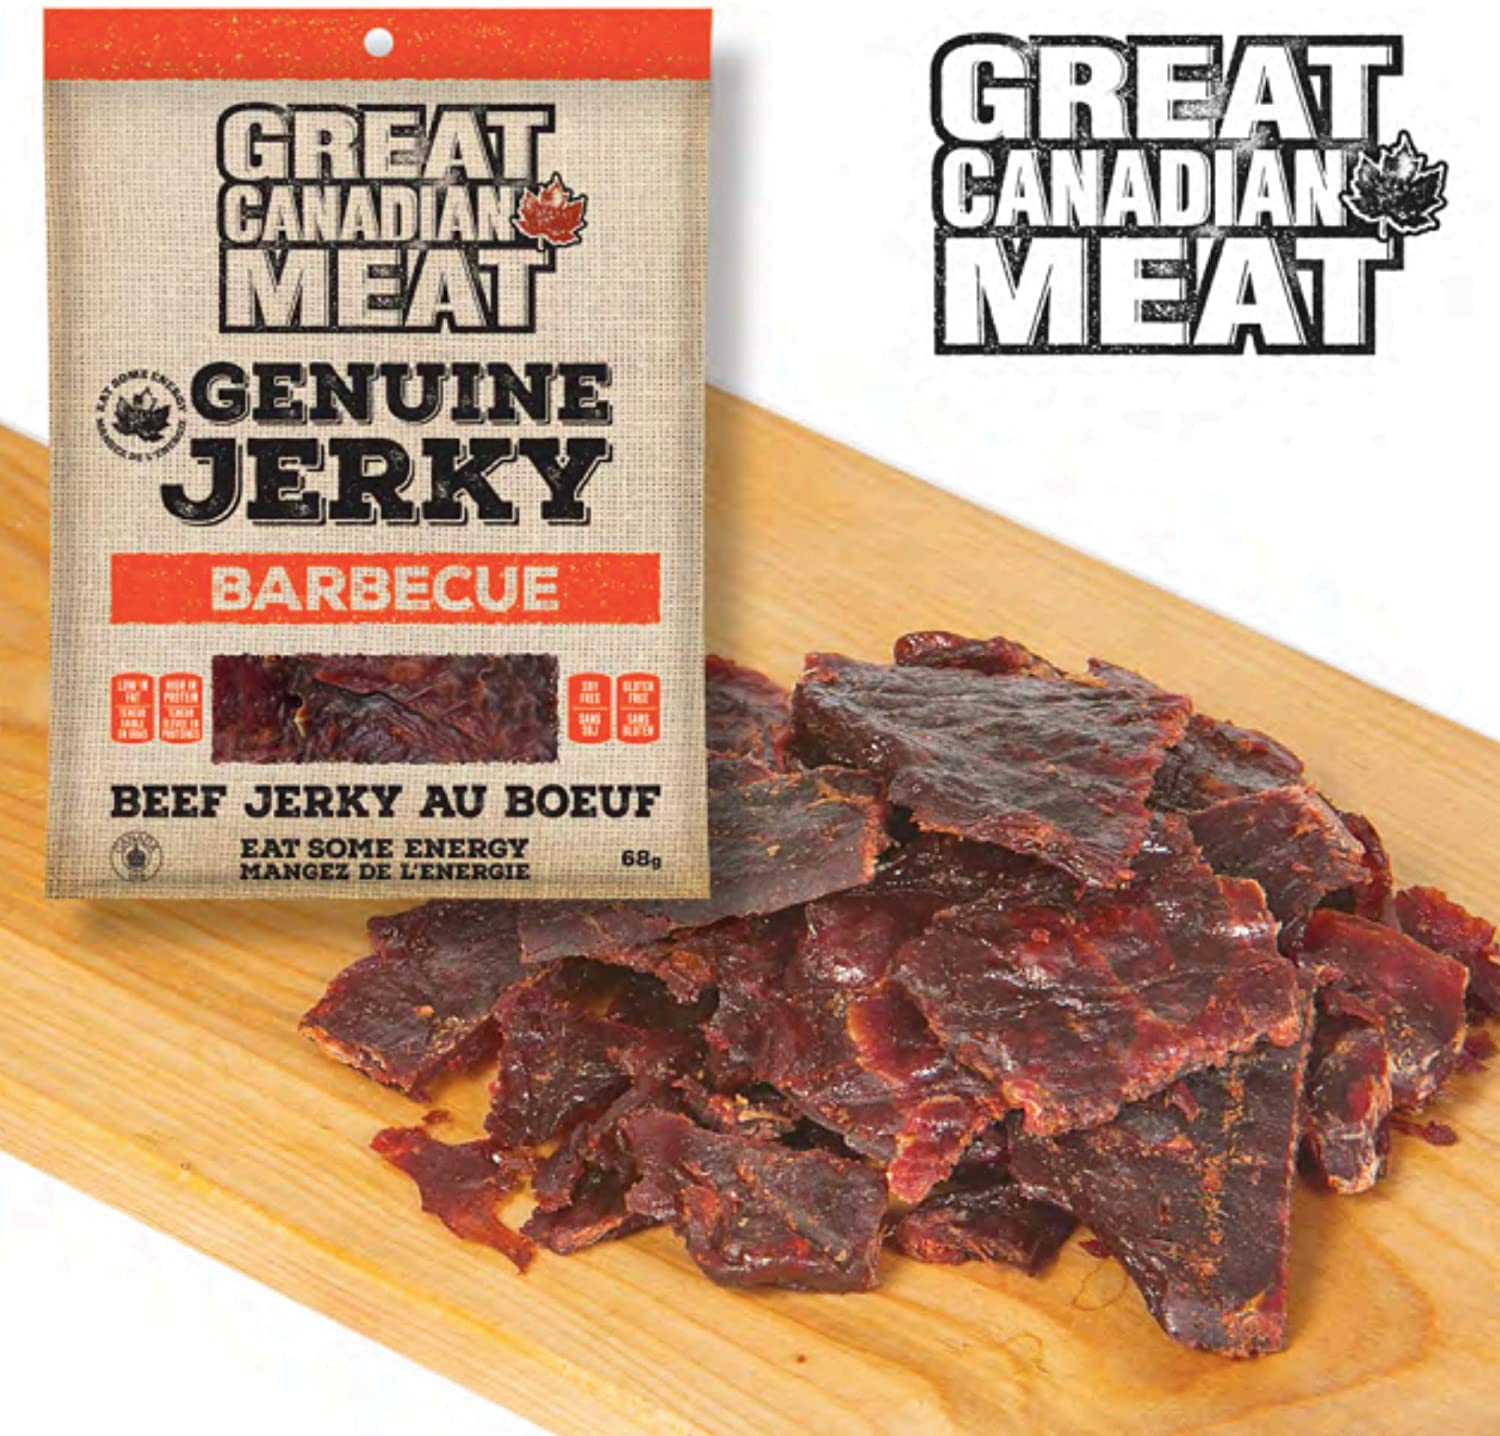 Barbecue Beef Jerky_1_cc